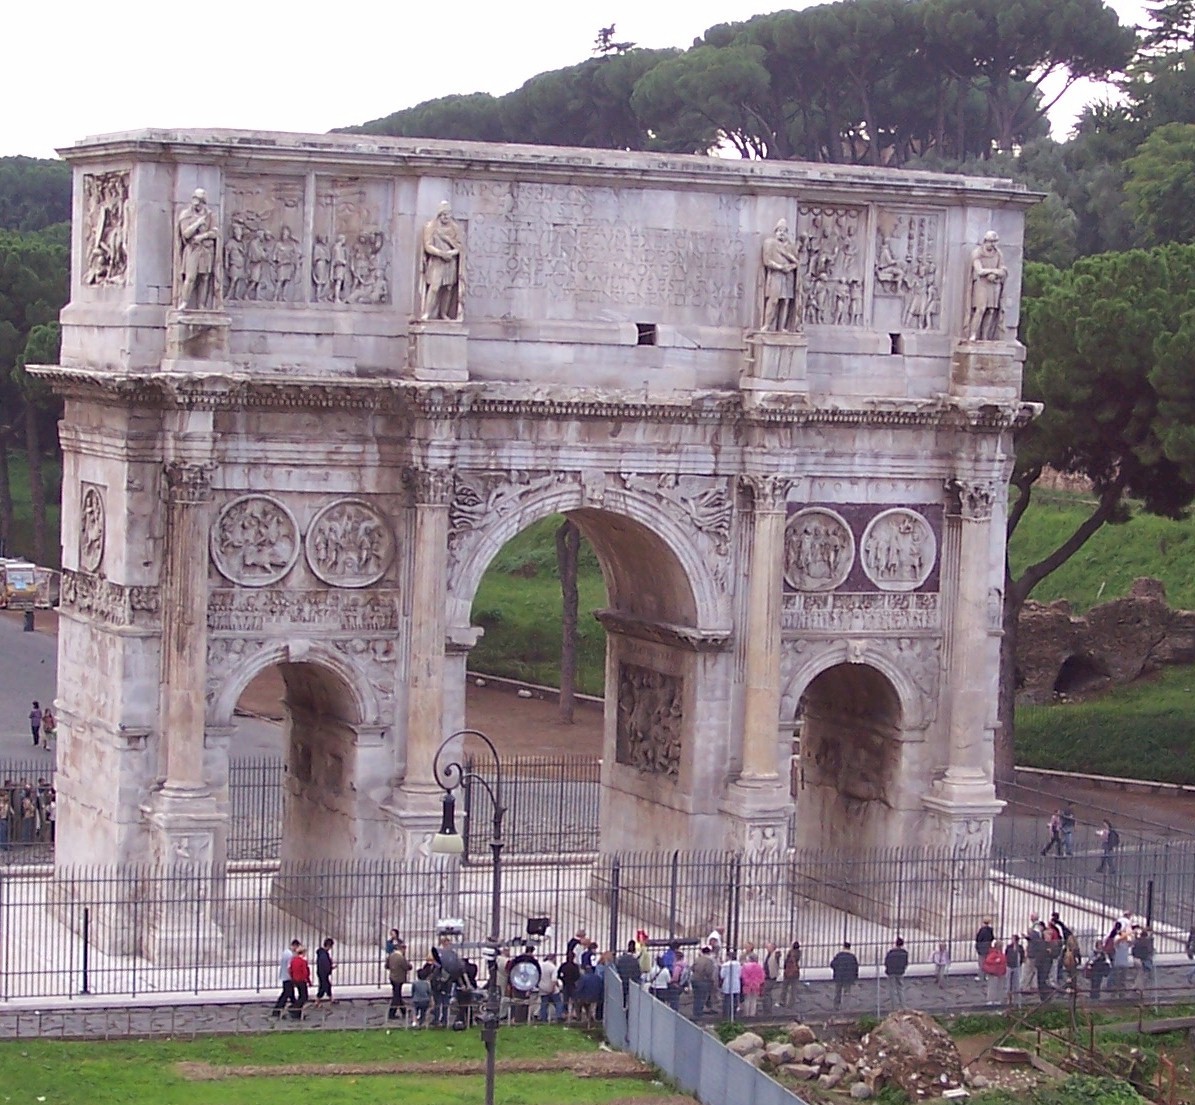 ARCH OF CONSTANTINE / ROME, ITALY -- PHOTOGRAPH BY DR. LENETTE S. TAYLOR